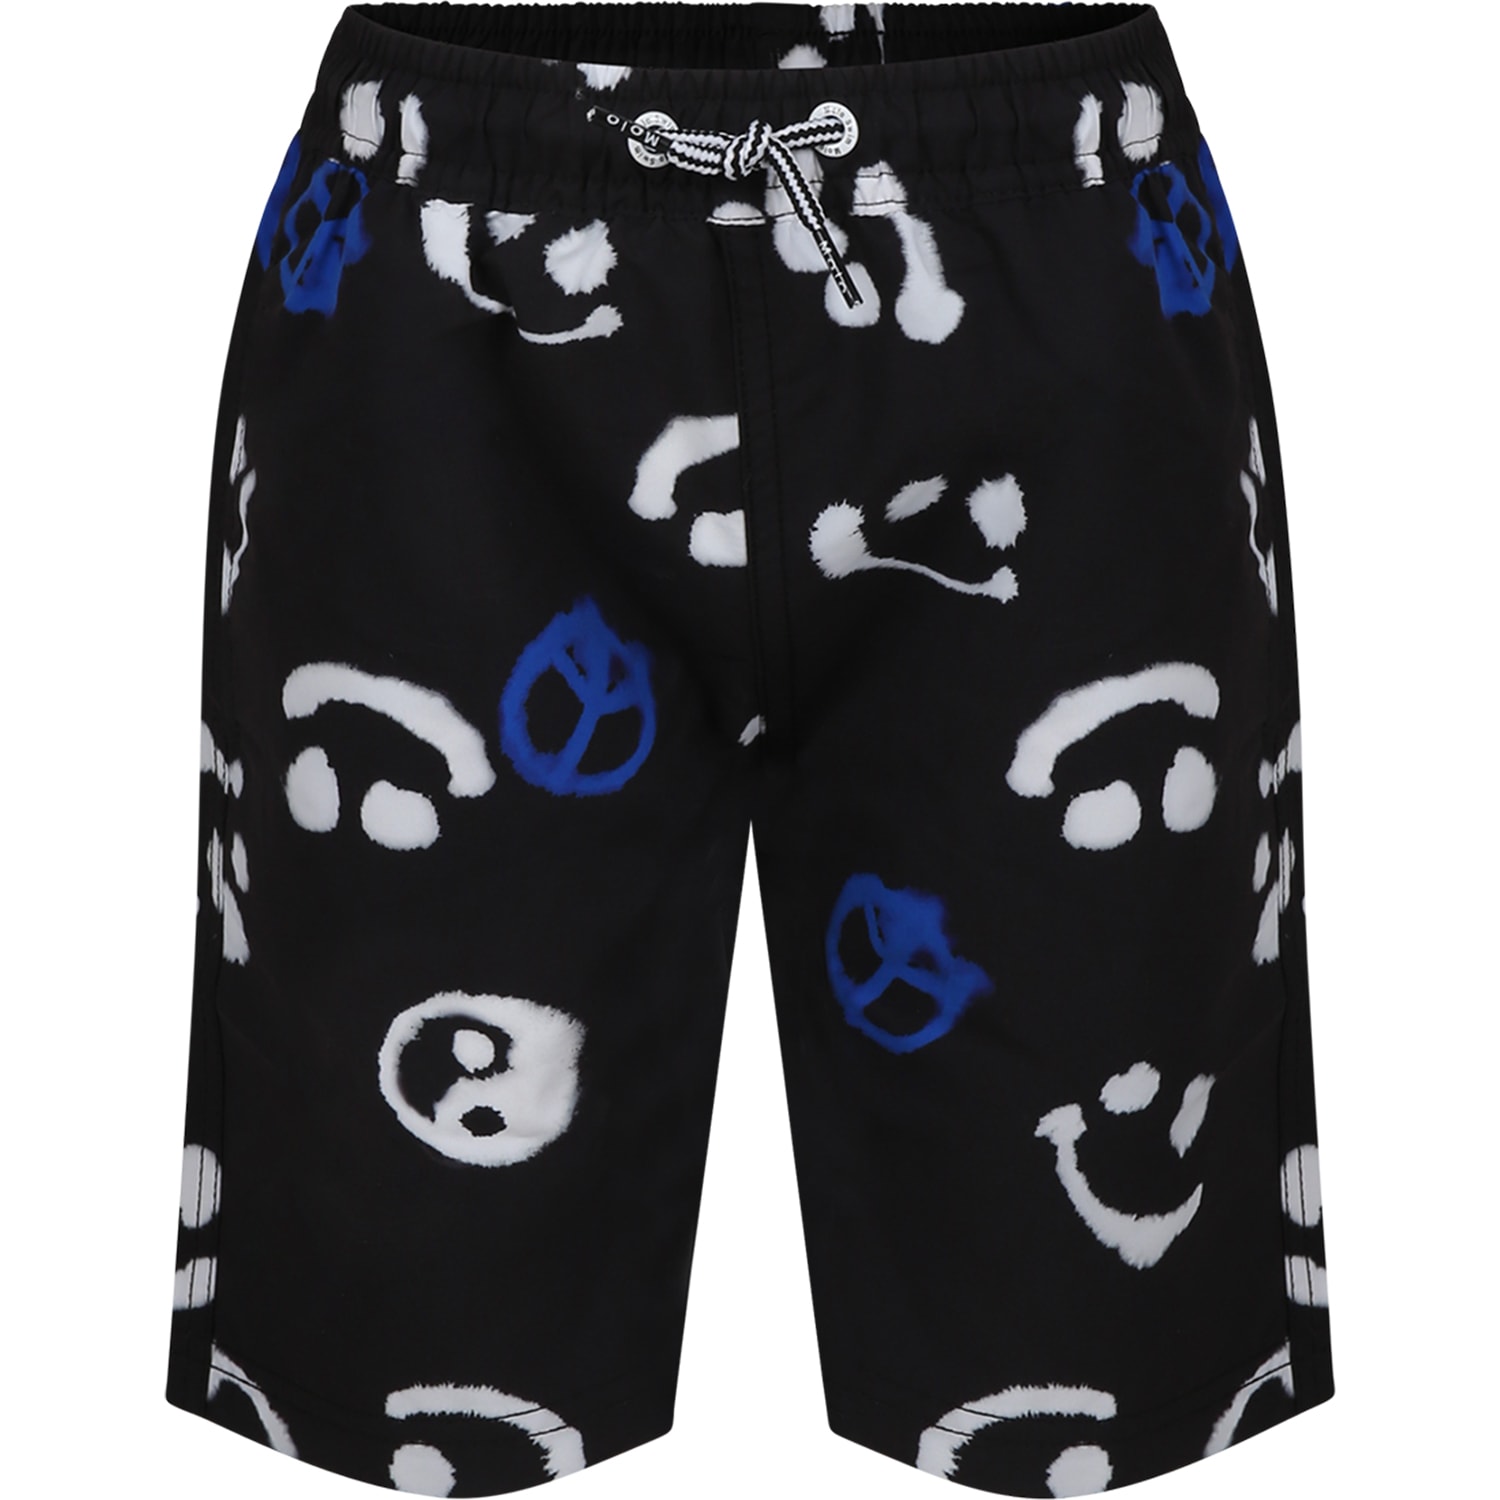 Molo Kids' Black Swimsuit For Boy With Smiley